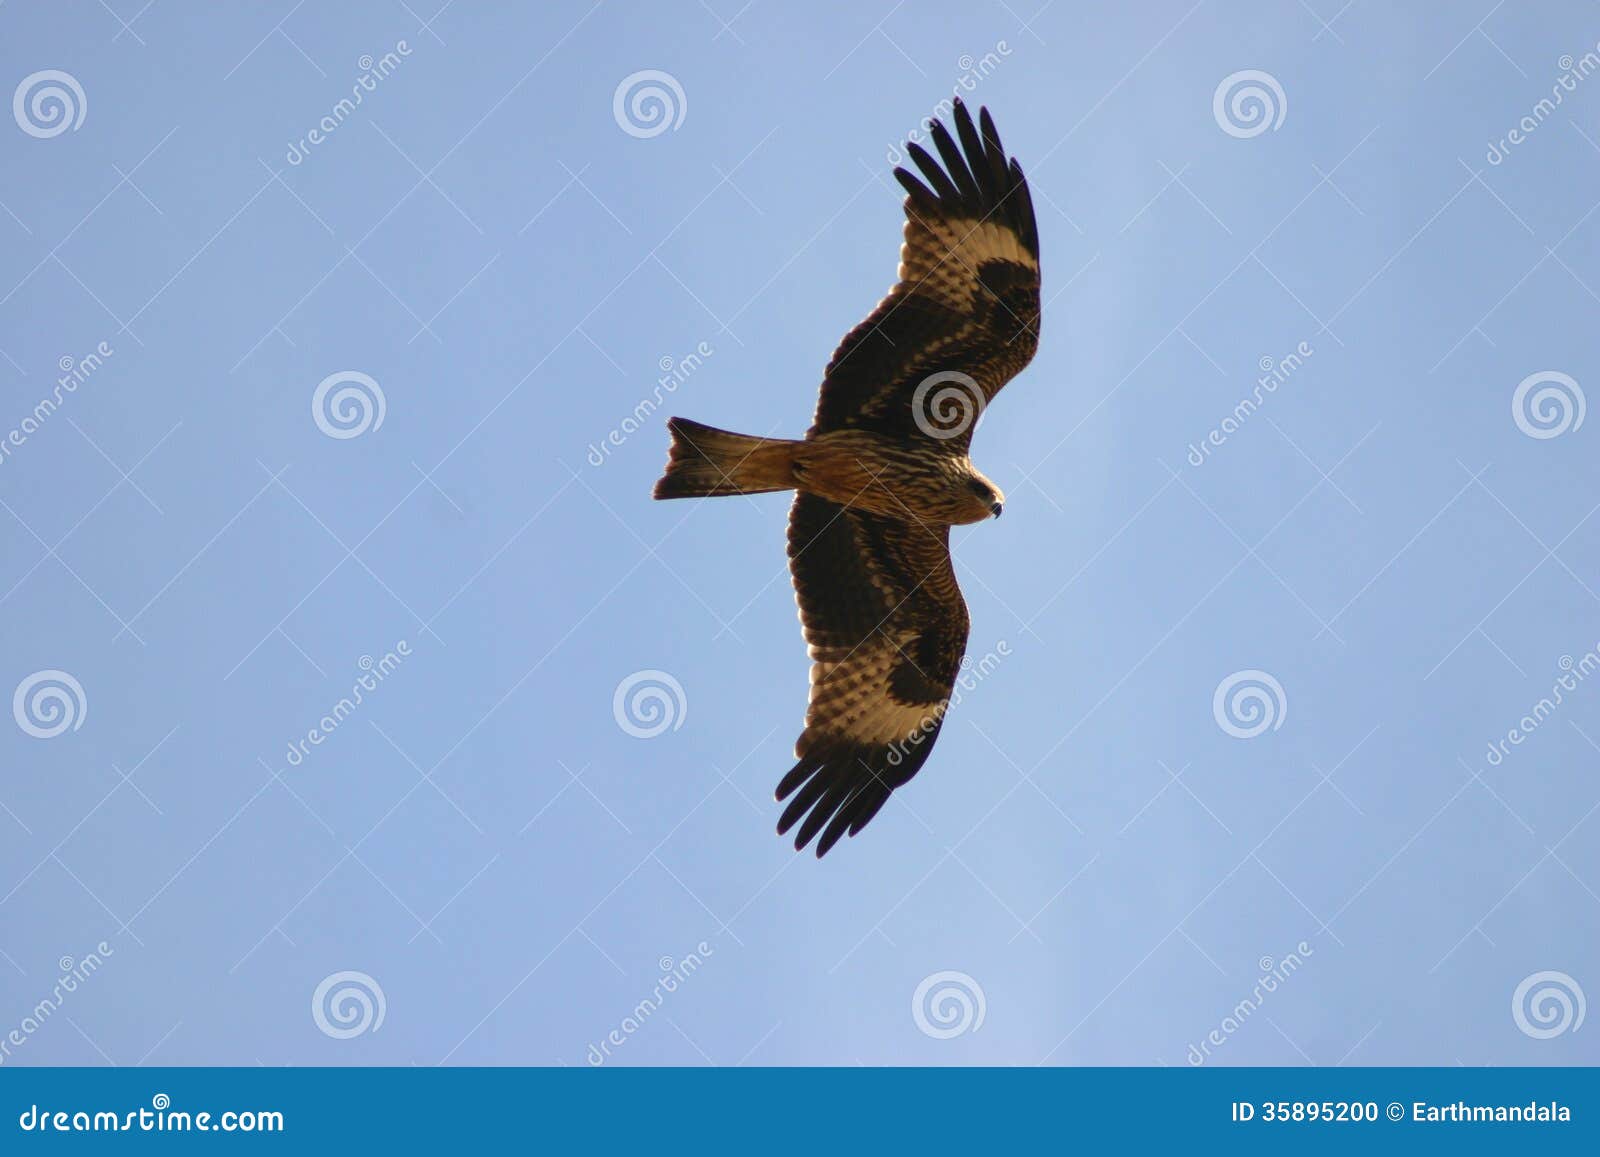 Long distance migrant, the Honey Buzzard can be seen in great numbers over Israel in spring and fall.